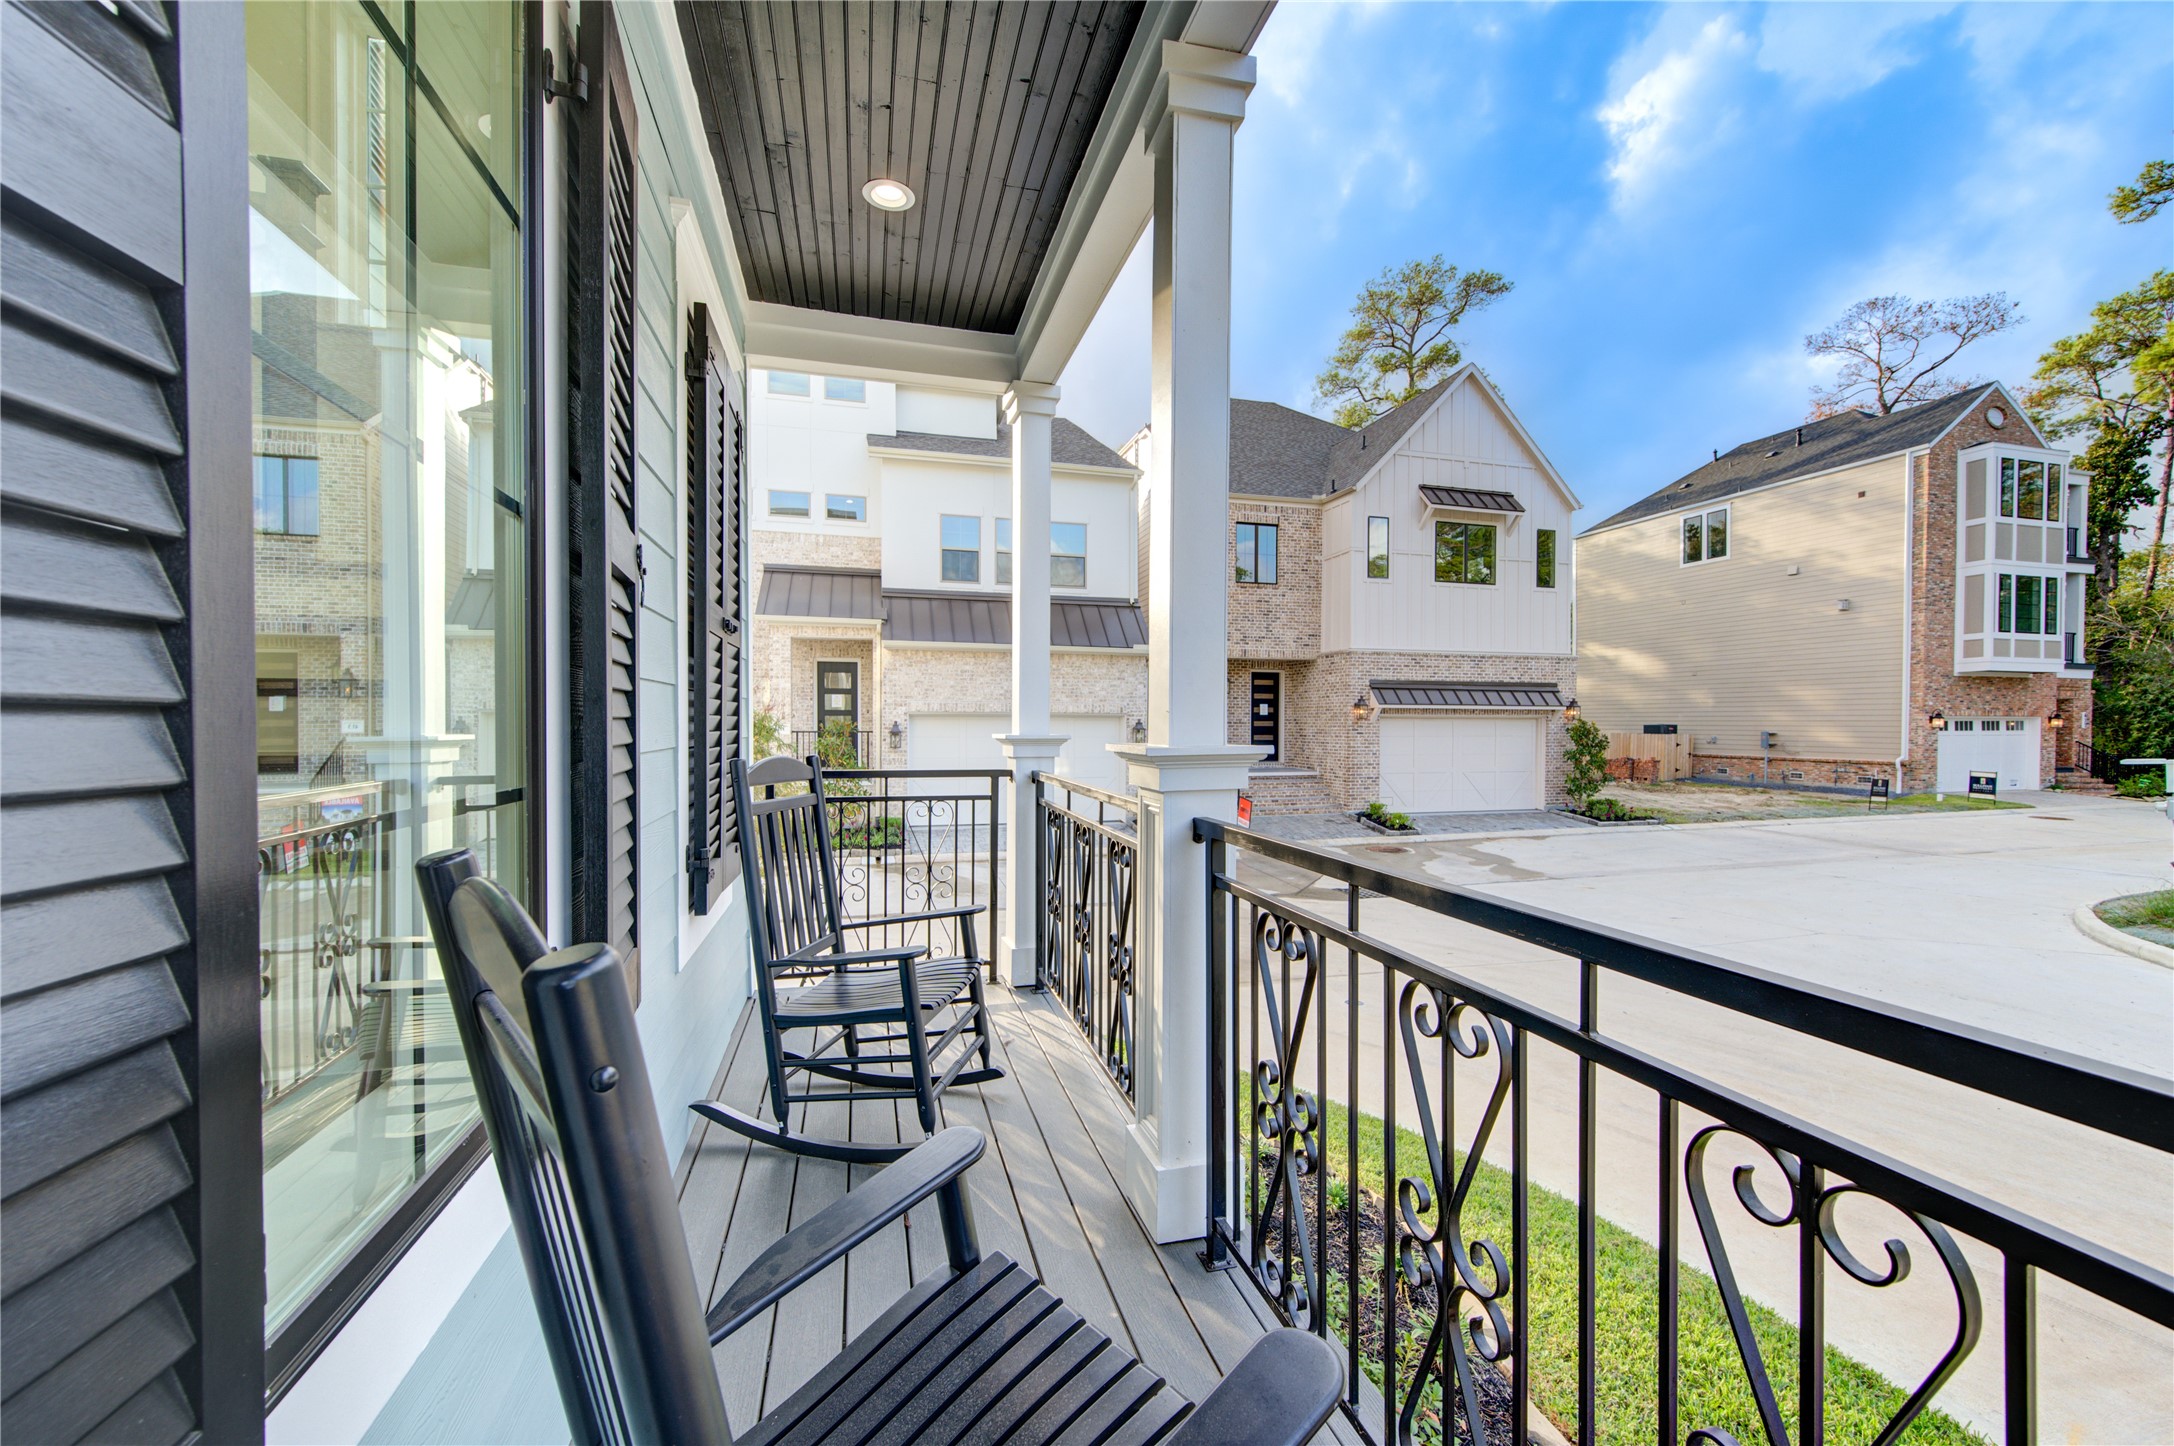 The Charlston inspired new construction by Sullivan Brothers Builders is designed around the expansive porches where you can entertain and enjoy a low maintenance lifestyle.